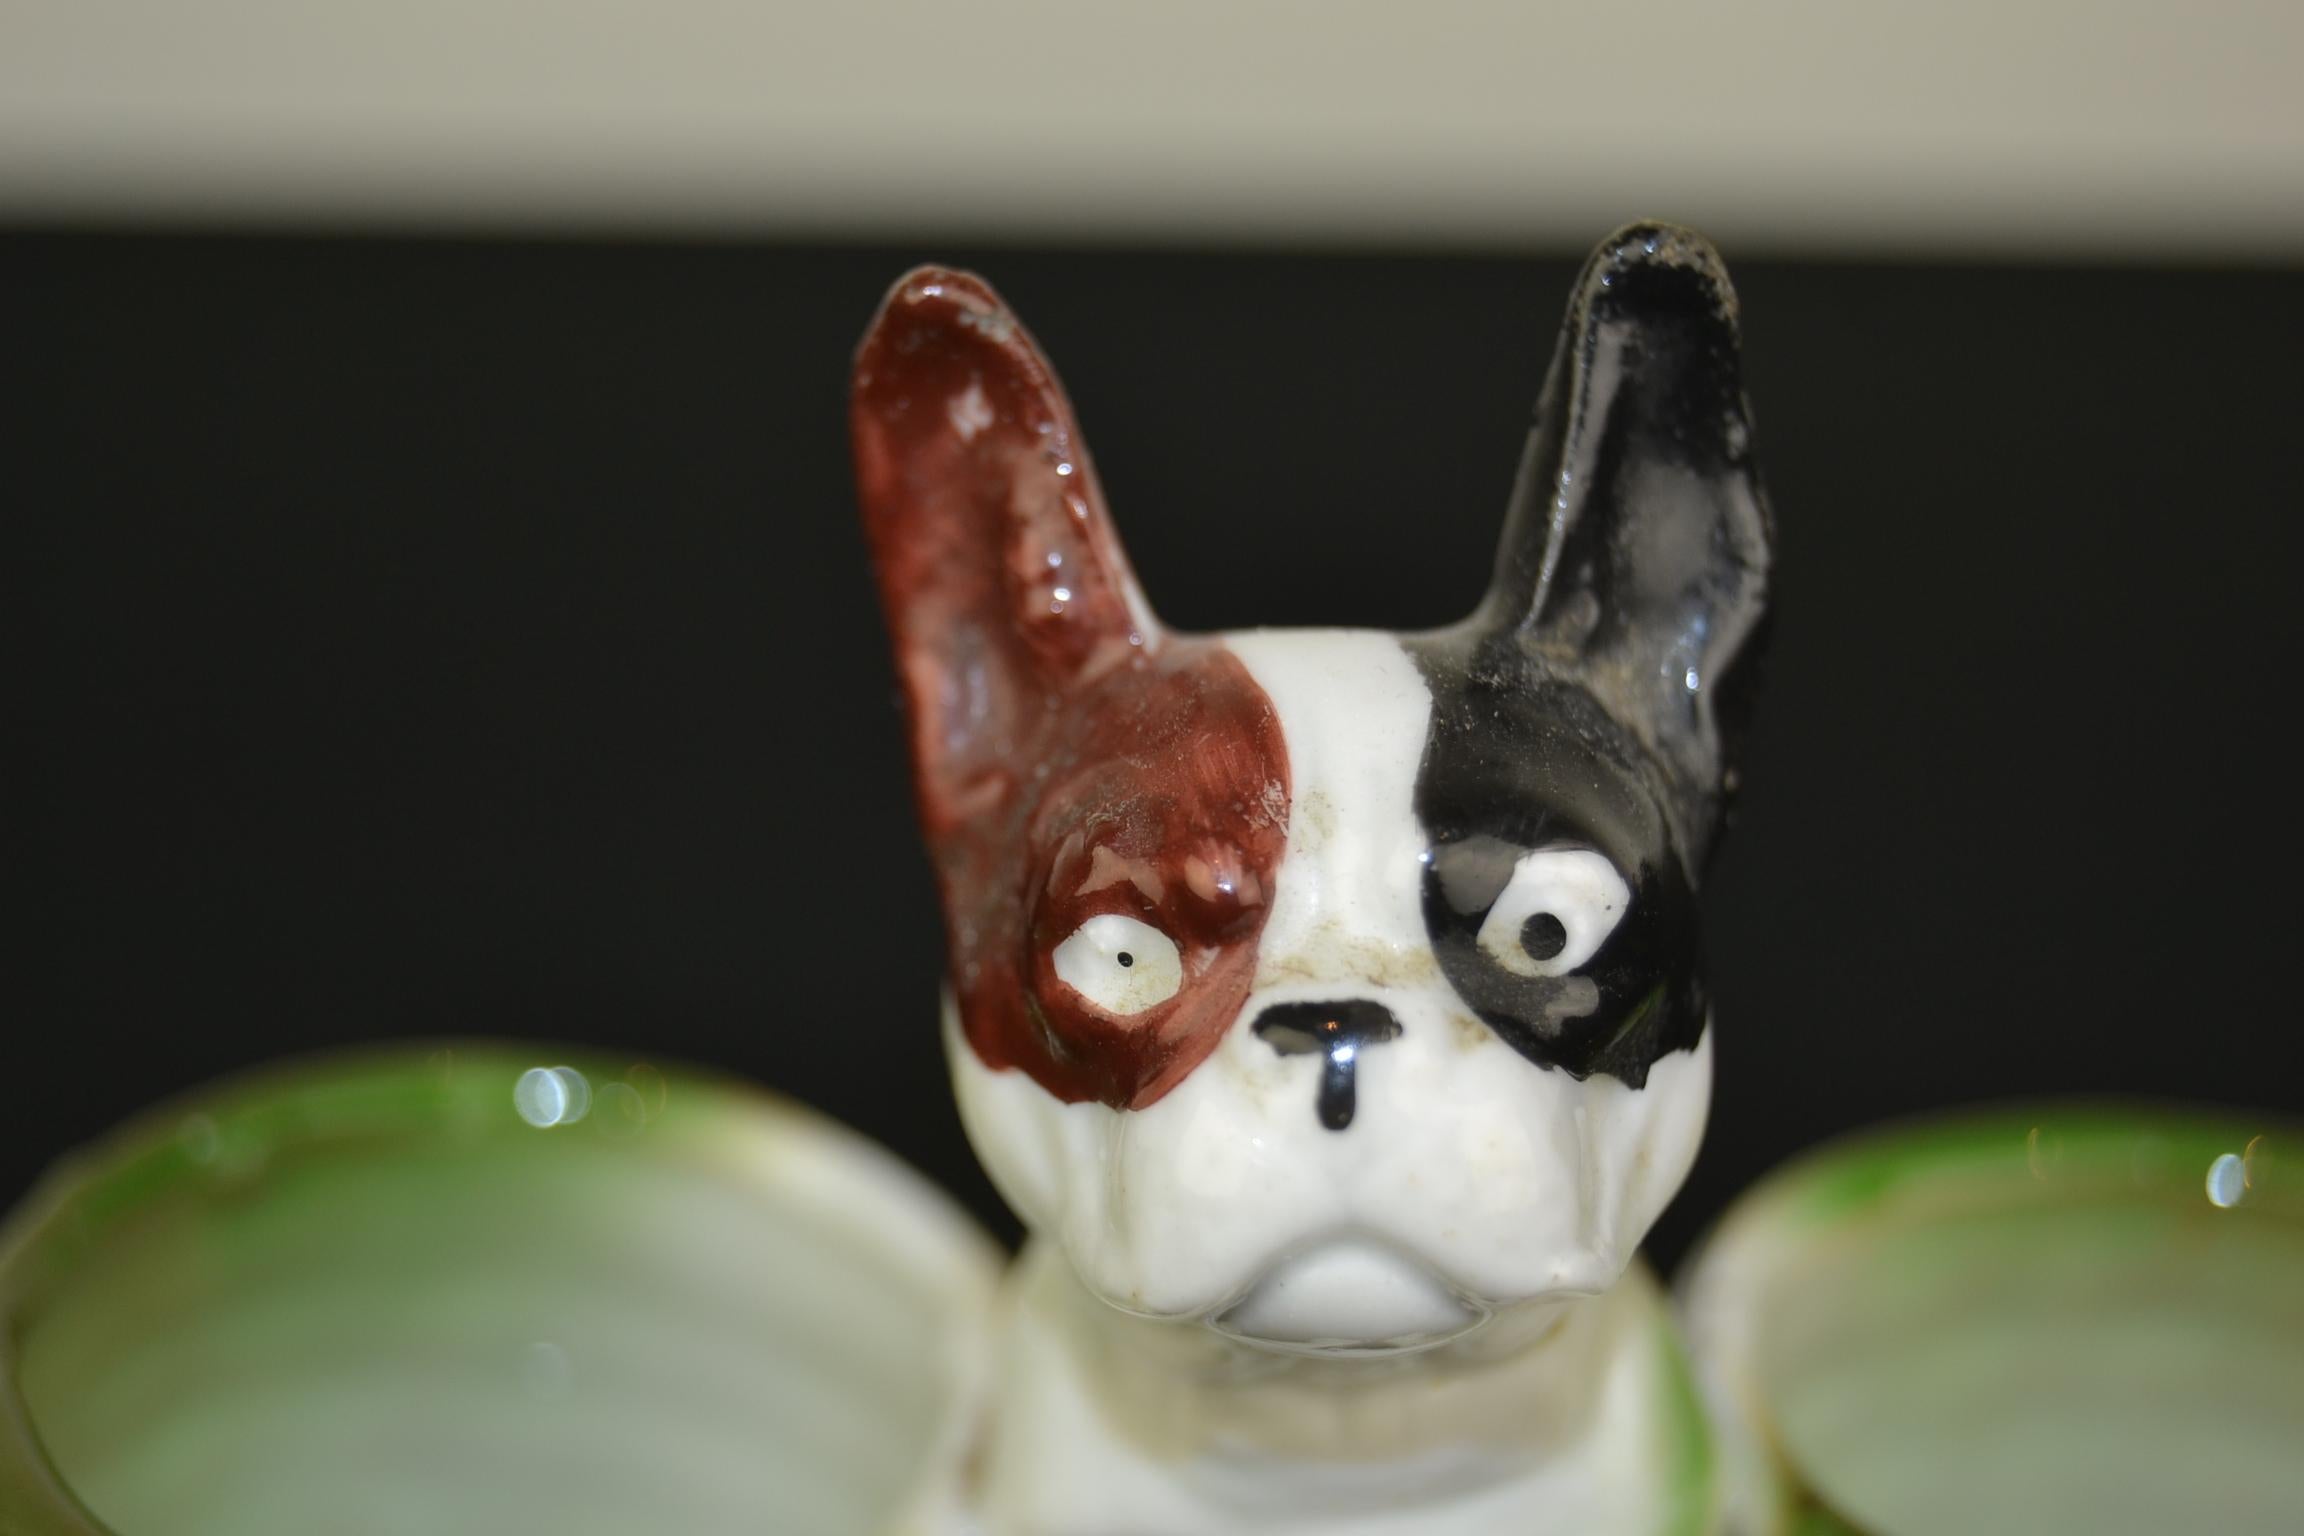 Art Deco porcelain bulldog sculpture. This bulldog sculpture is sitting between two open green baskets which can be used to put mustard, salt or other in. Bulldog figurine has the white color with a brown and black ear. This dog sculpture is in